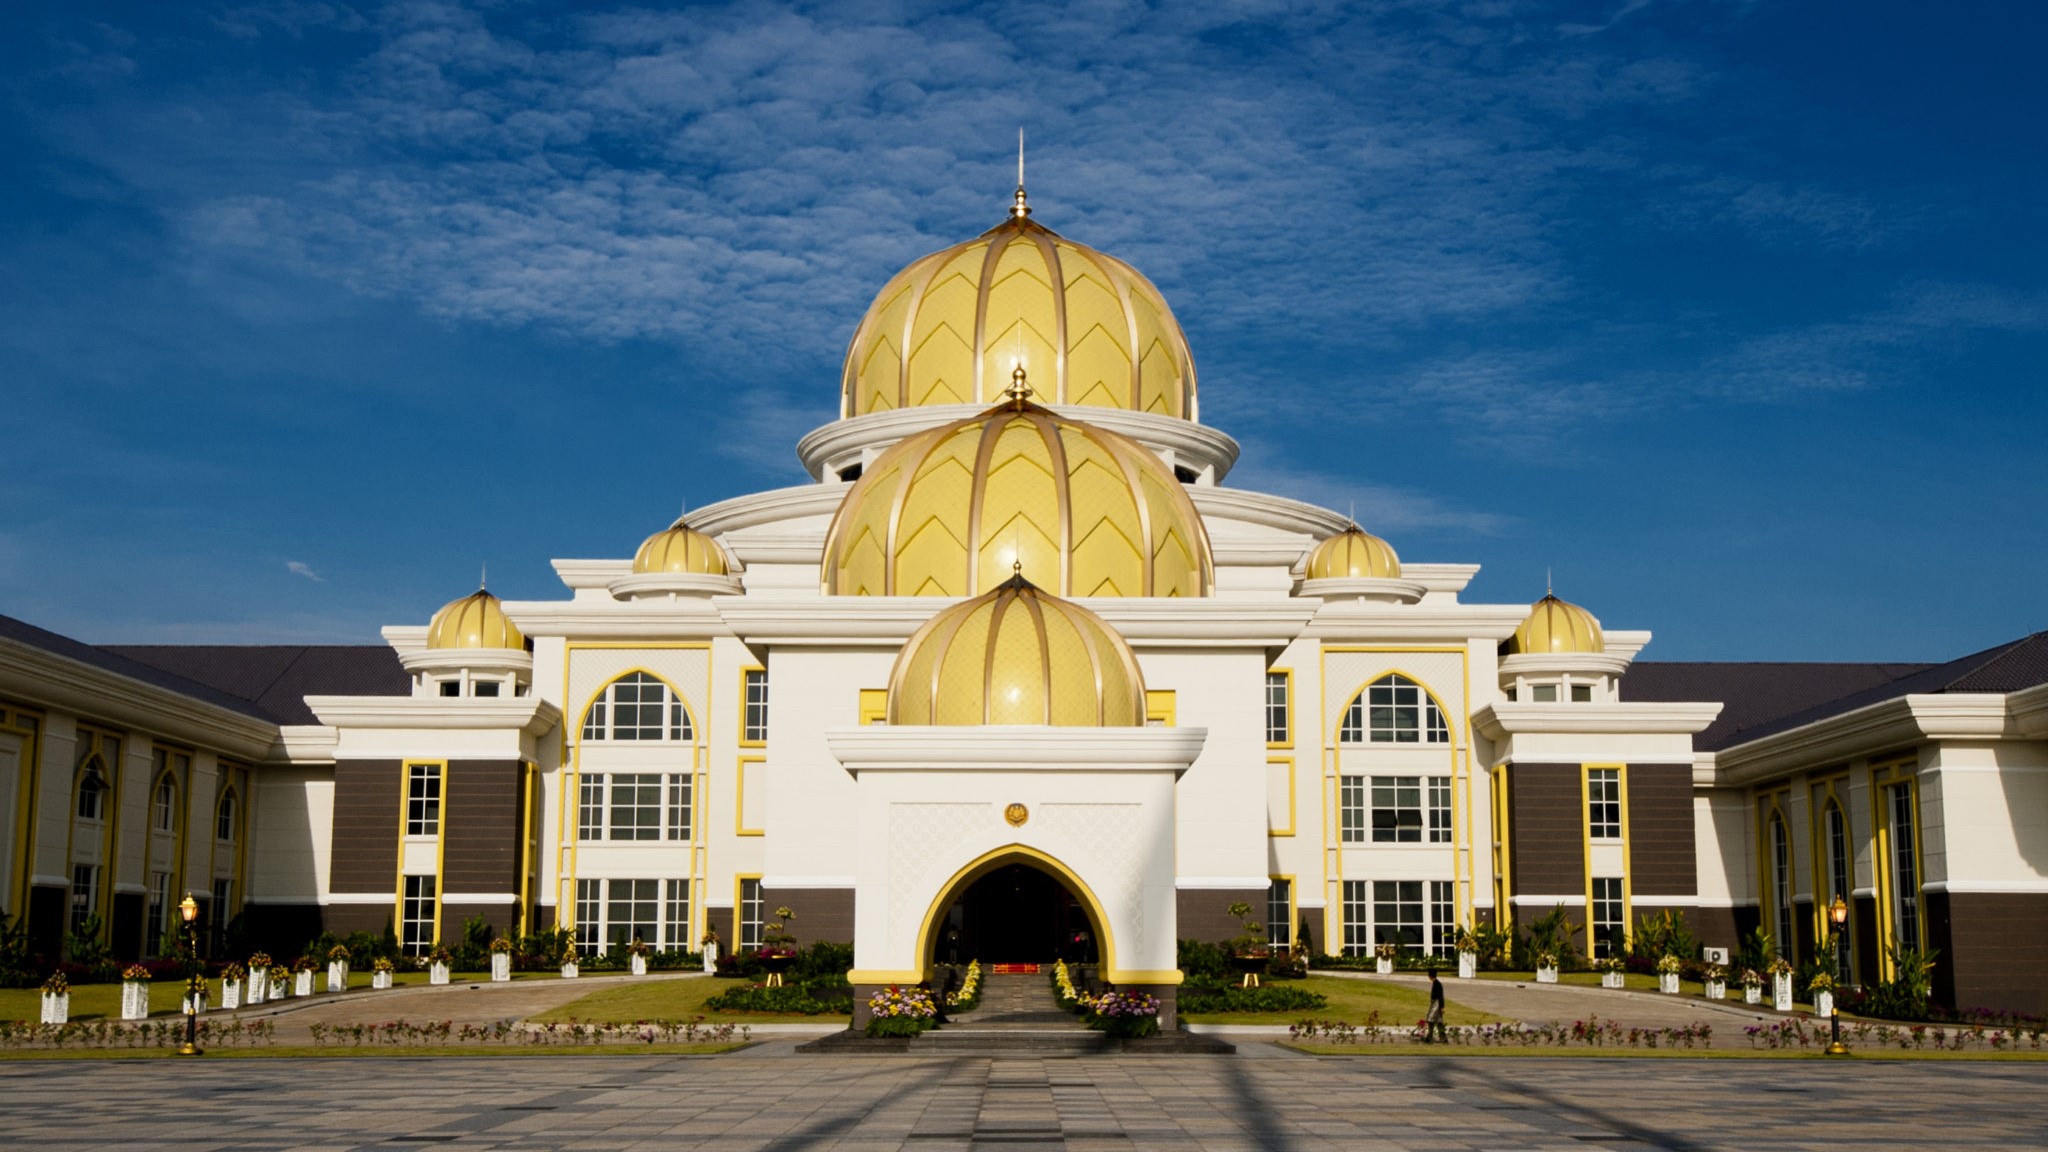 The National Palace of Malaysia